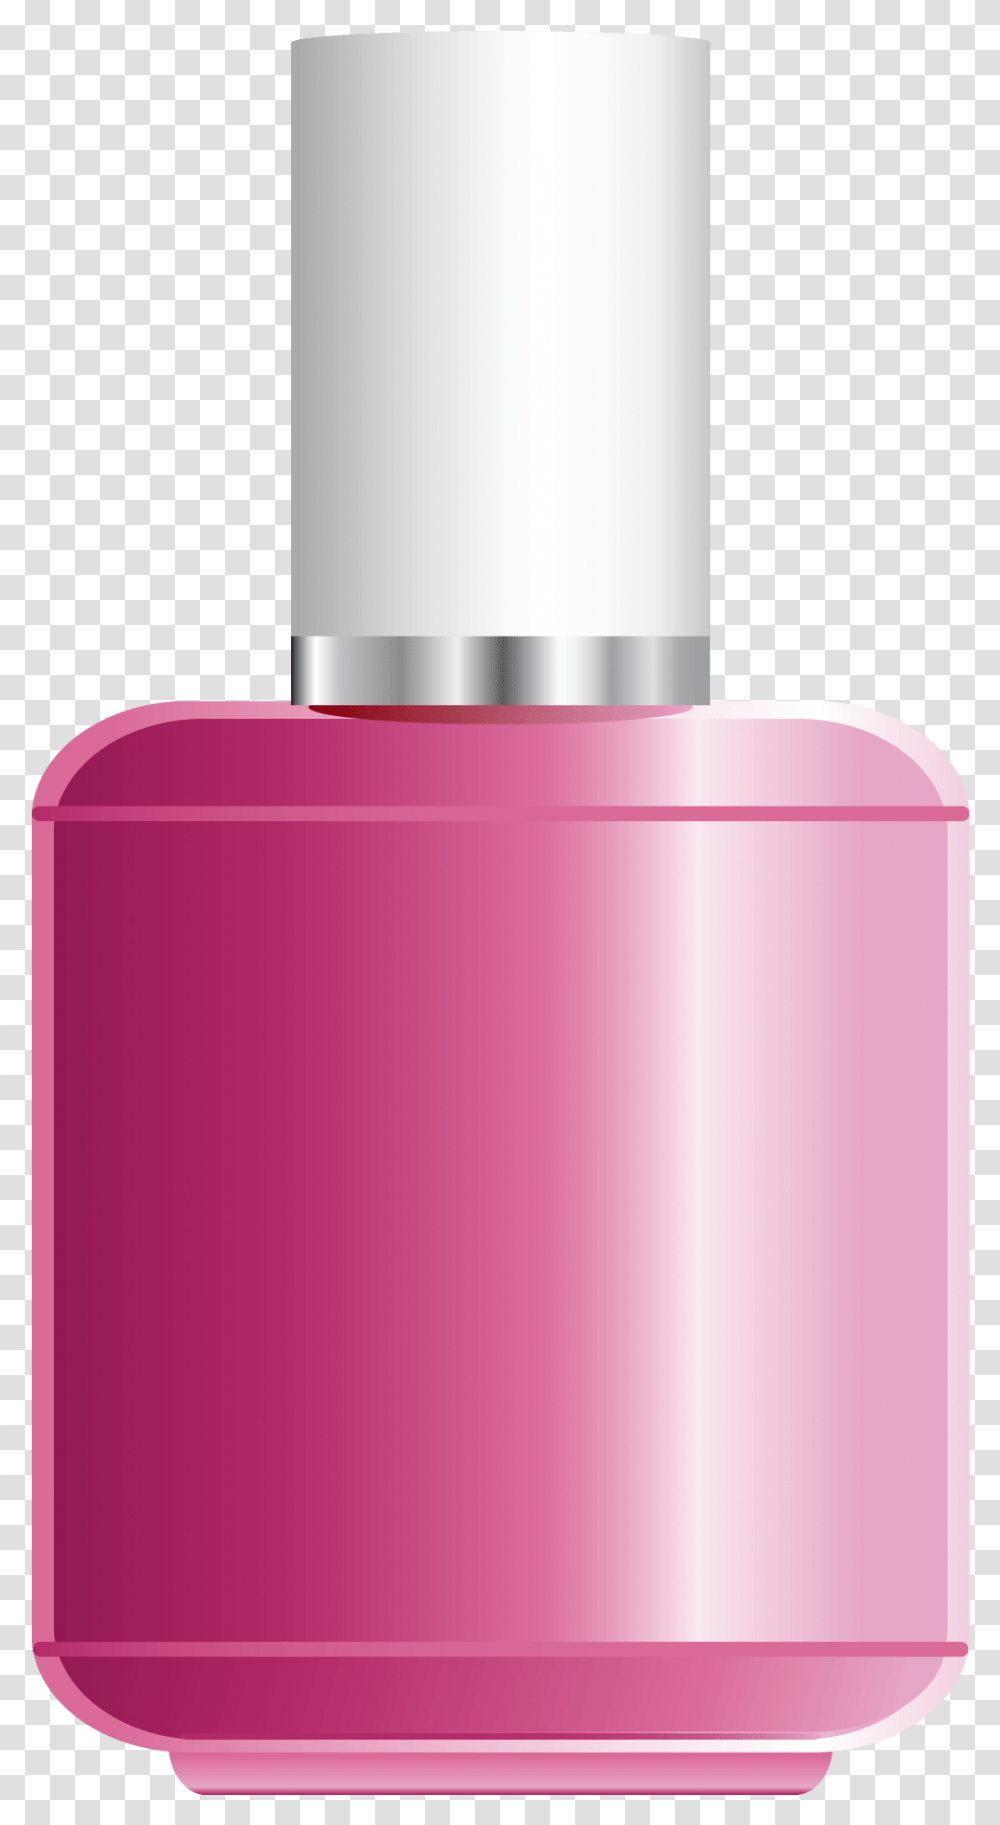 Clipart Of Nail Polish Bottle Tips And Clipart Of Nail Pink Nail Polish Clipart, Cosmetics, Perfume, Lipstick, Cylinder Transparent Png